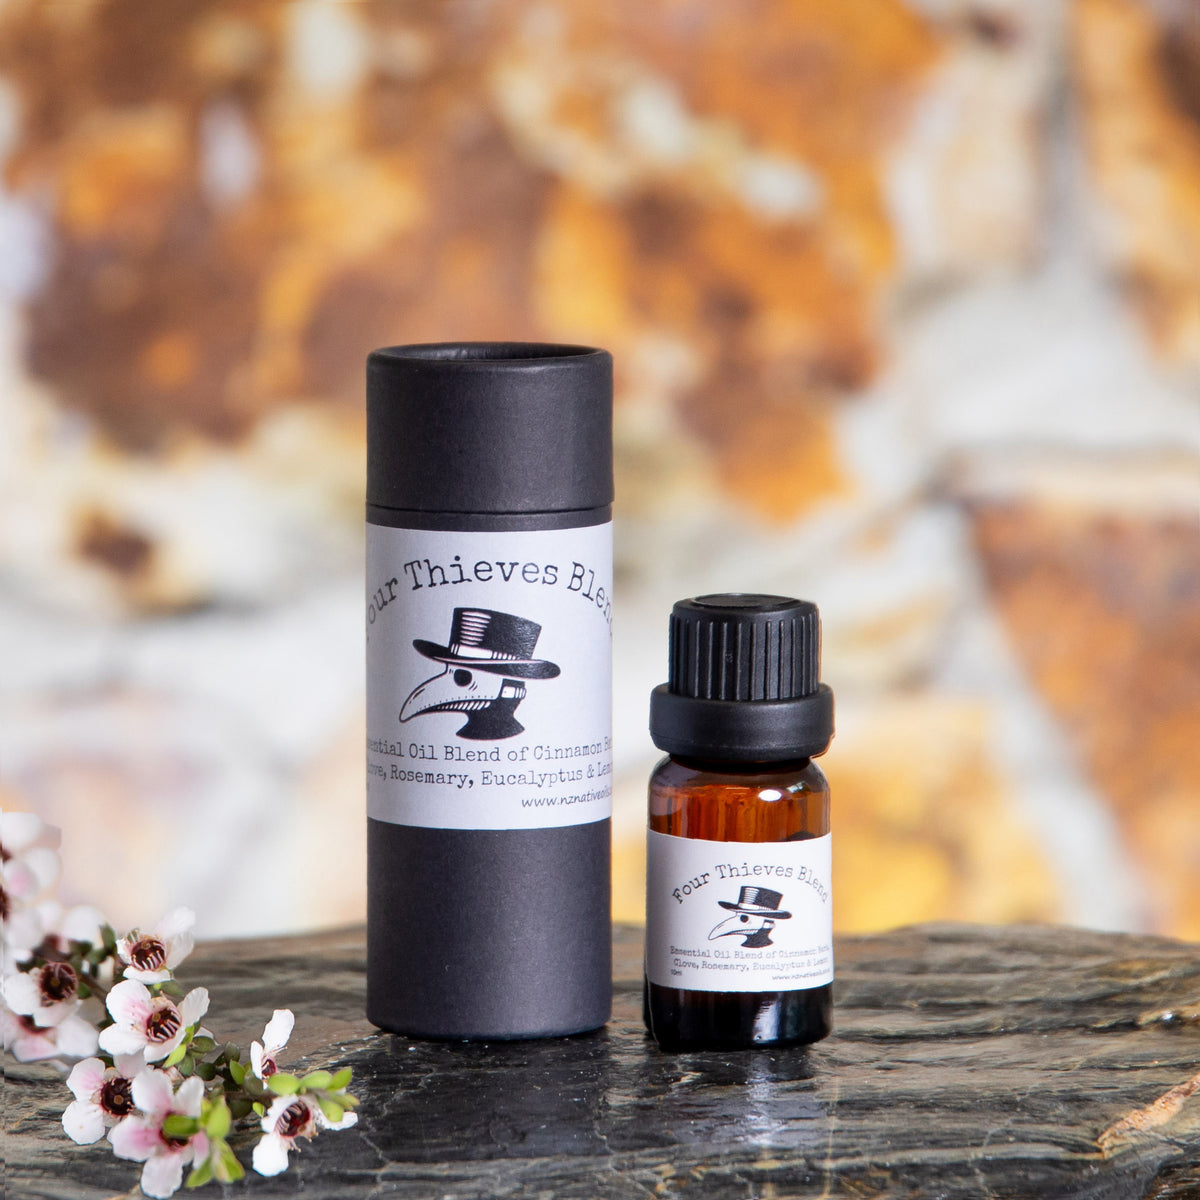 4oz Thief Immunity Essential Oil Organic Blend (Based on The Tale of Four Thieves) Therapeutic Grade USDA Certified Blend of Clove, Cinnamon, Rosema